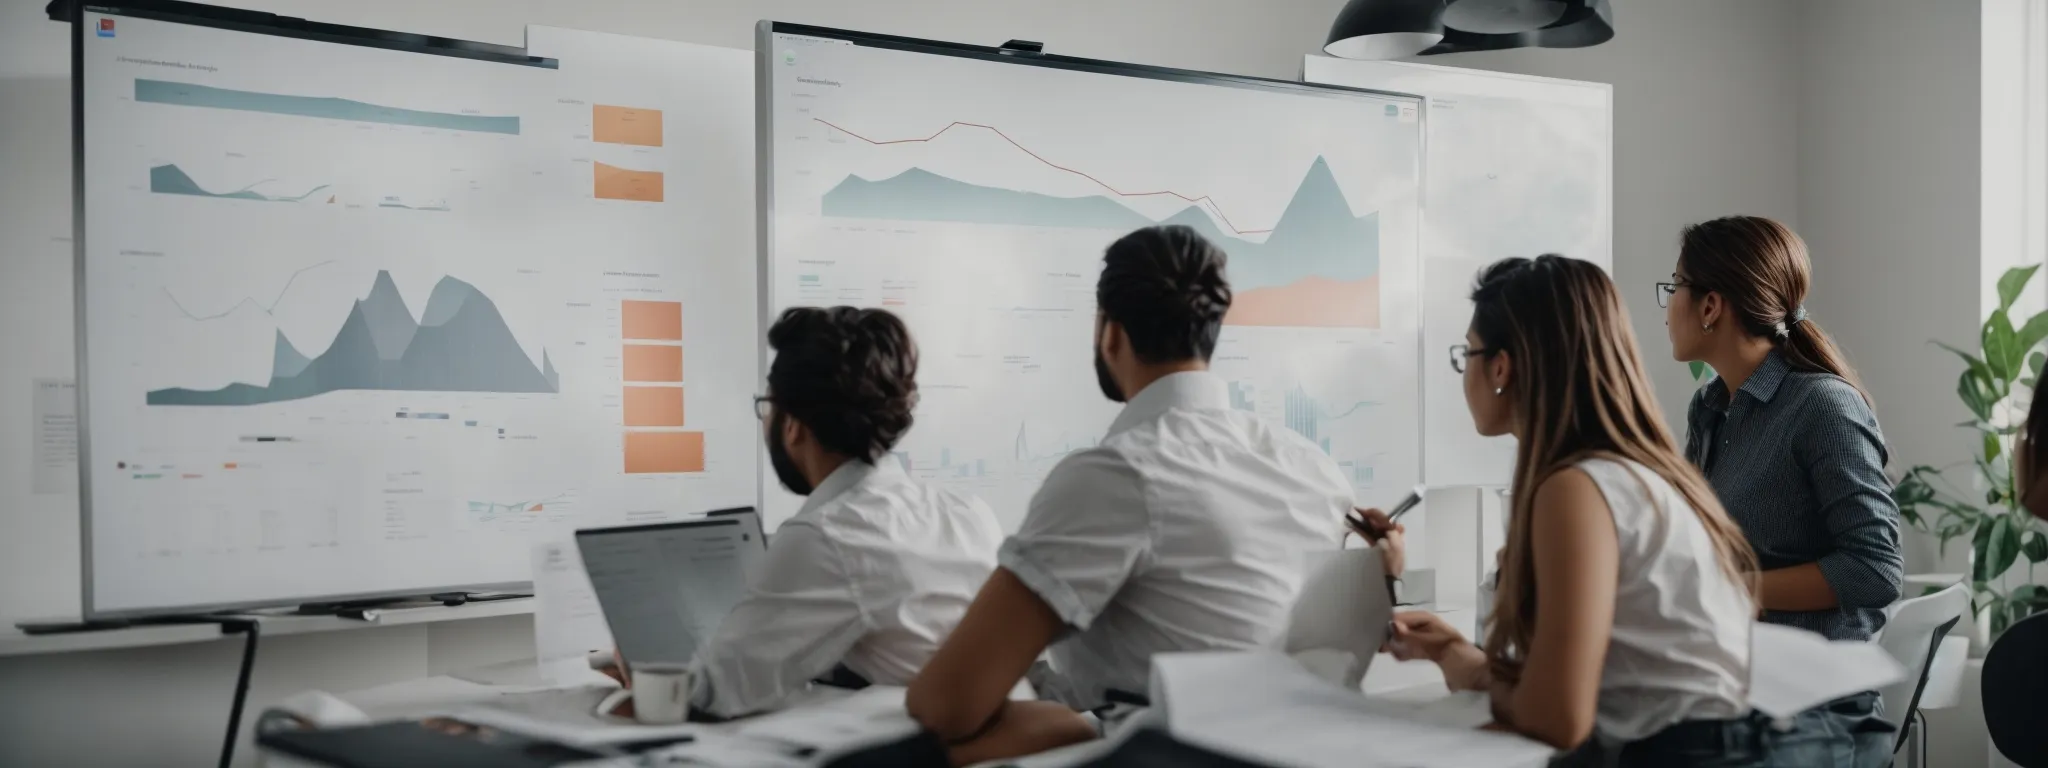 a marketing team analyzes graphs and charts on a whiteboard to segment their audience for a precise seo strategy.